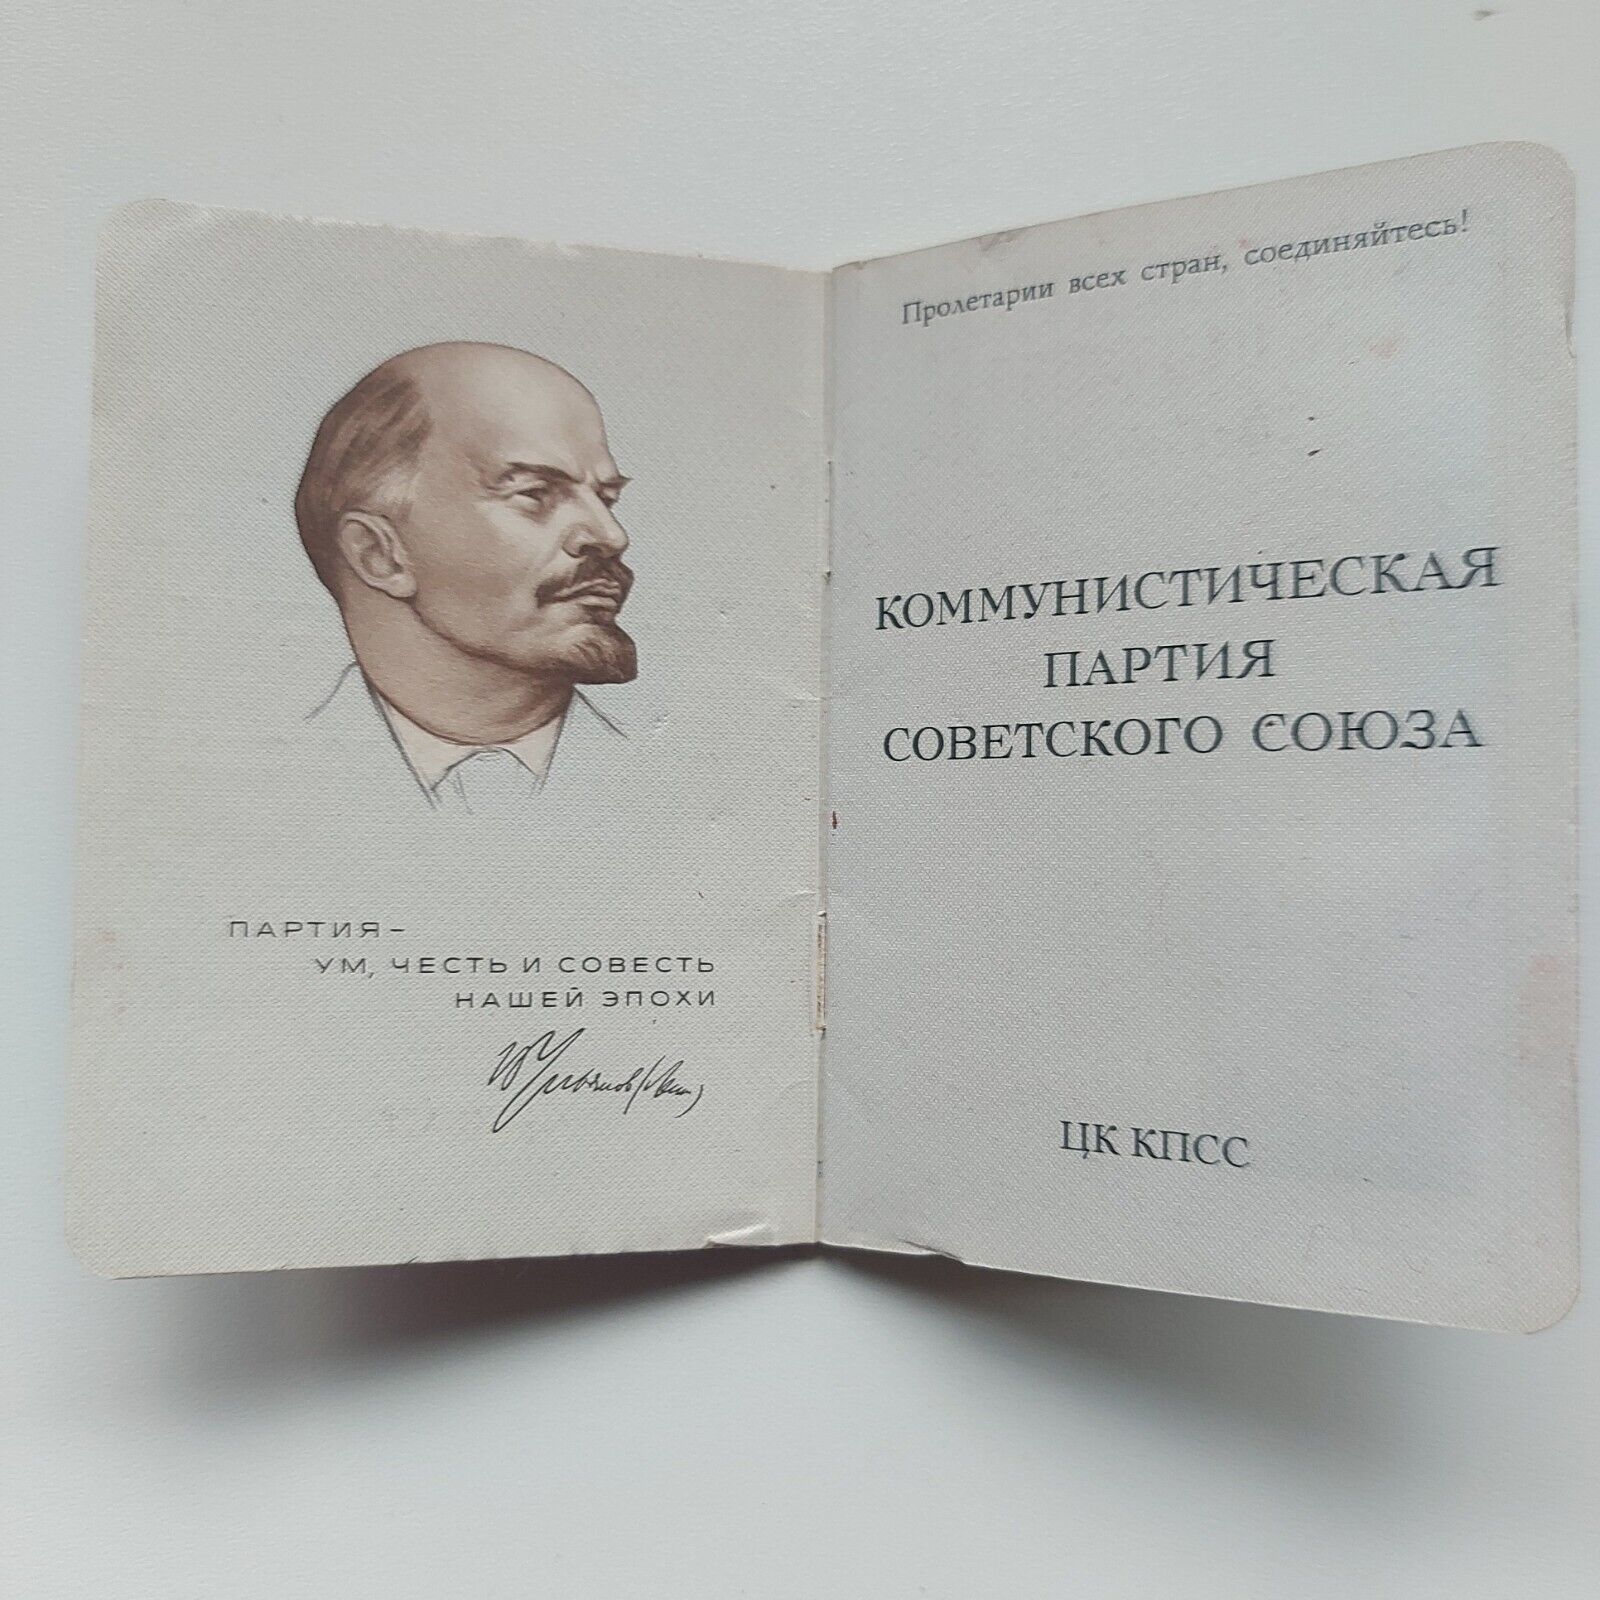 USSR PARTY ID, CARD, of a Member Of the Communist Party of the Soviet Union#345R